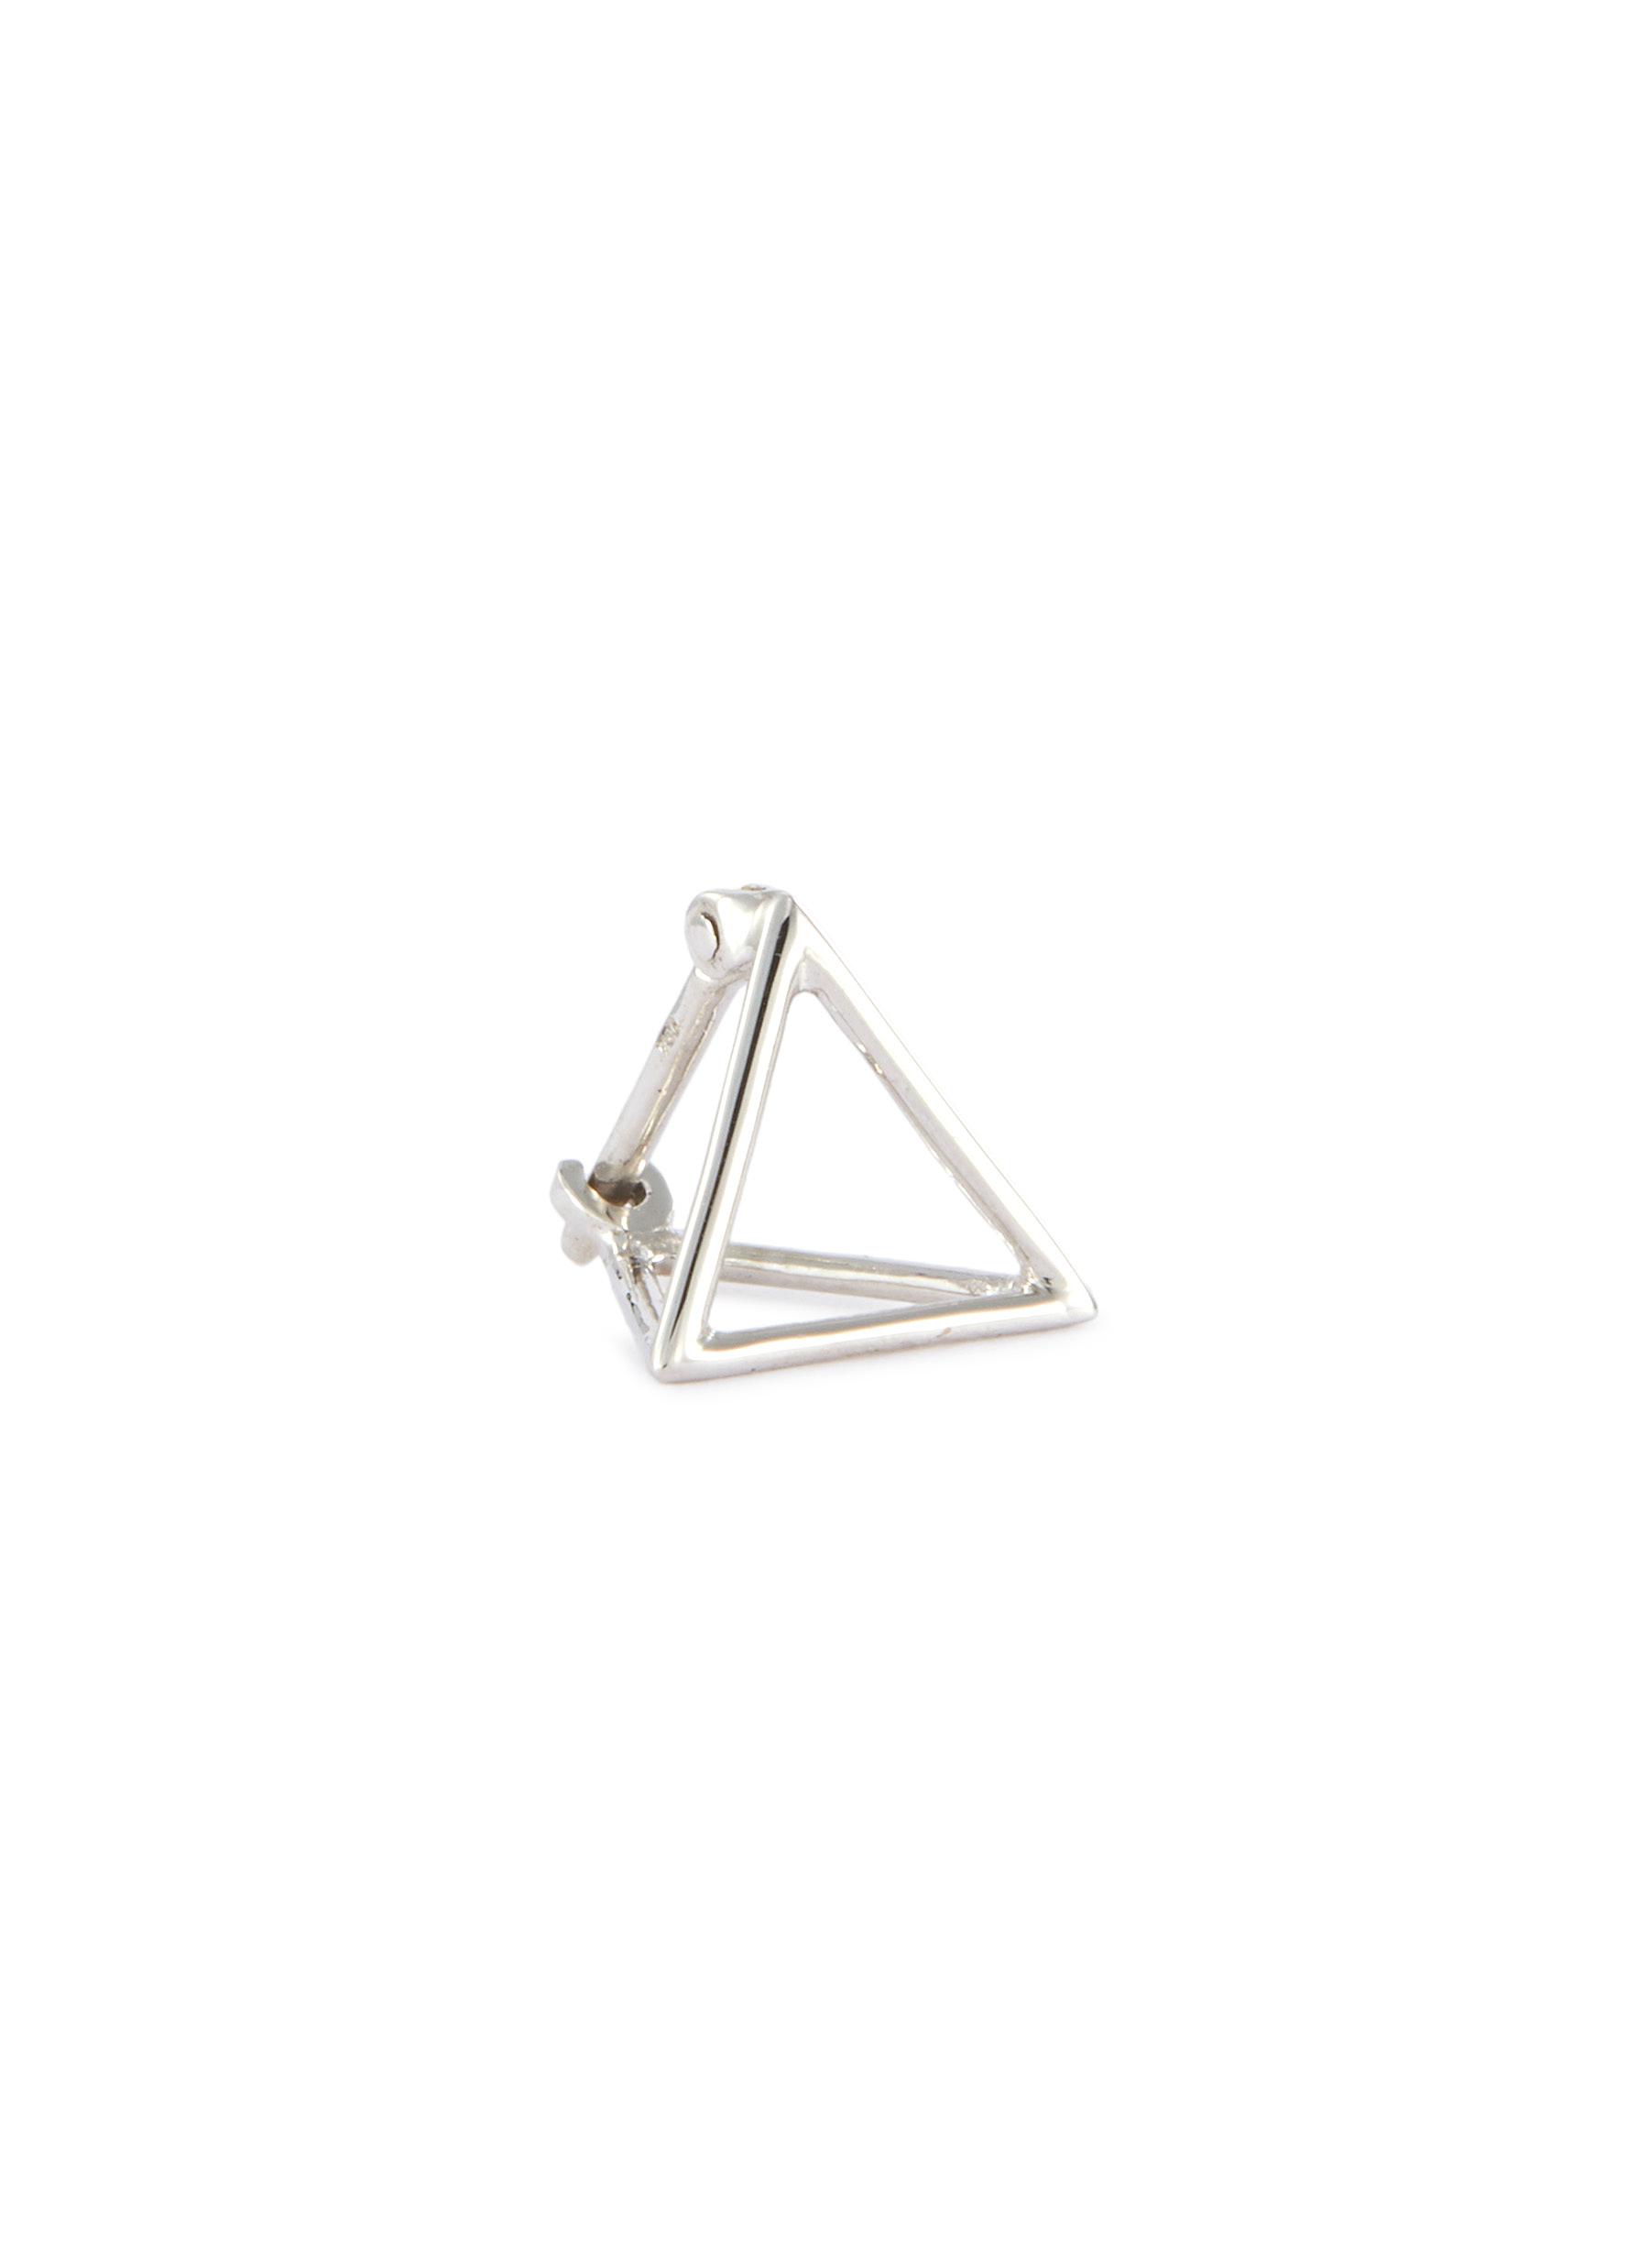 'Triangle' 18k white gold pyramid single earring - 10mm